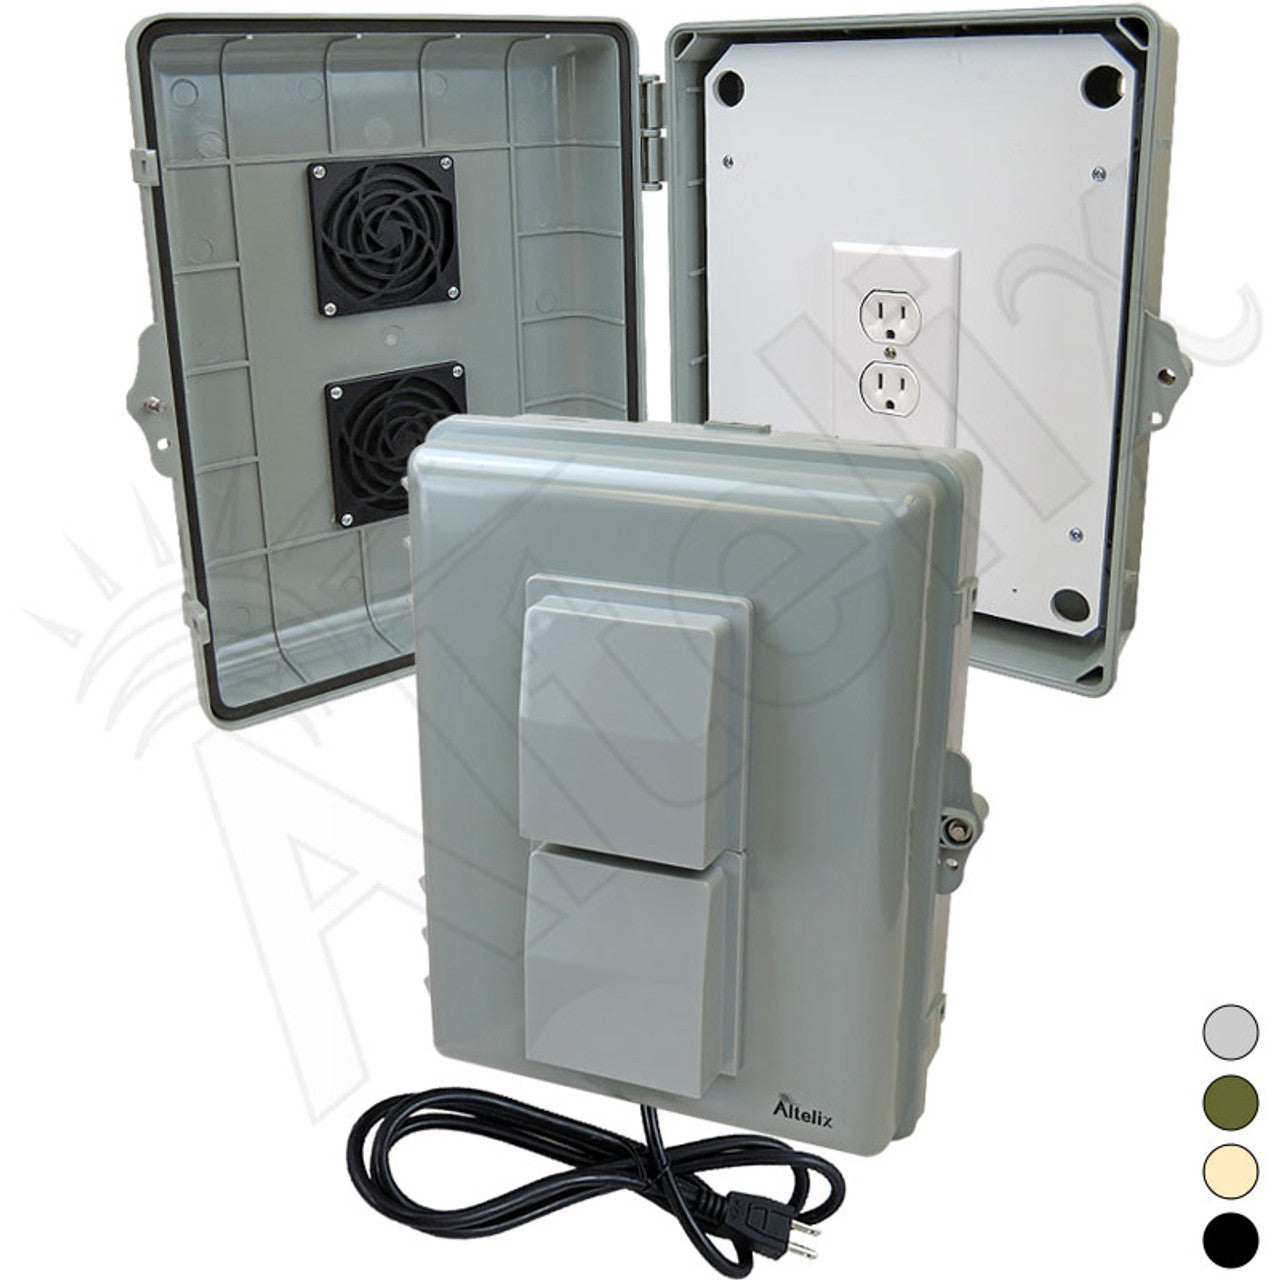 Altelix Weatherproof Vented WiFi Enclosure with No-Drill Equipment Mounting Plate, 120VAC Outlets and Power Cord-1